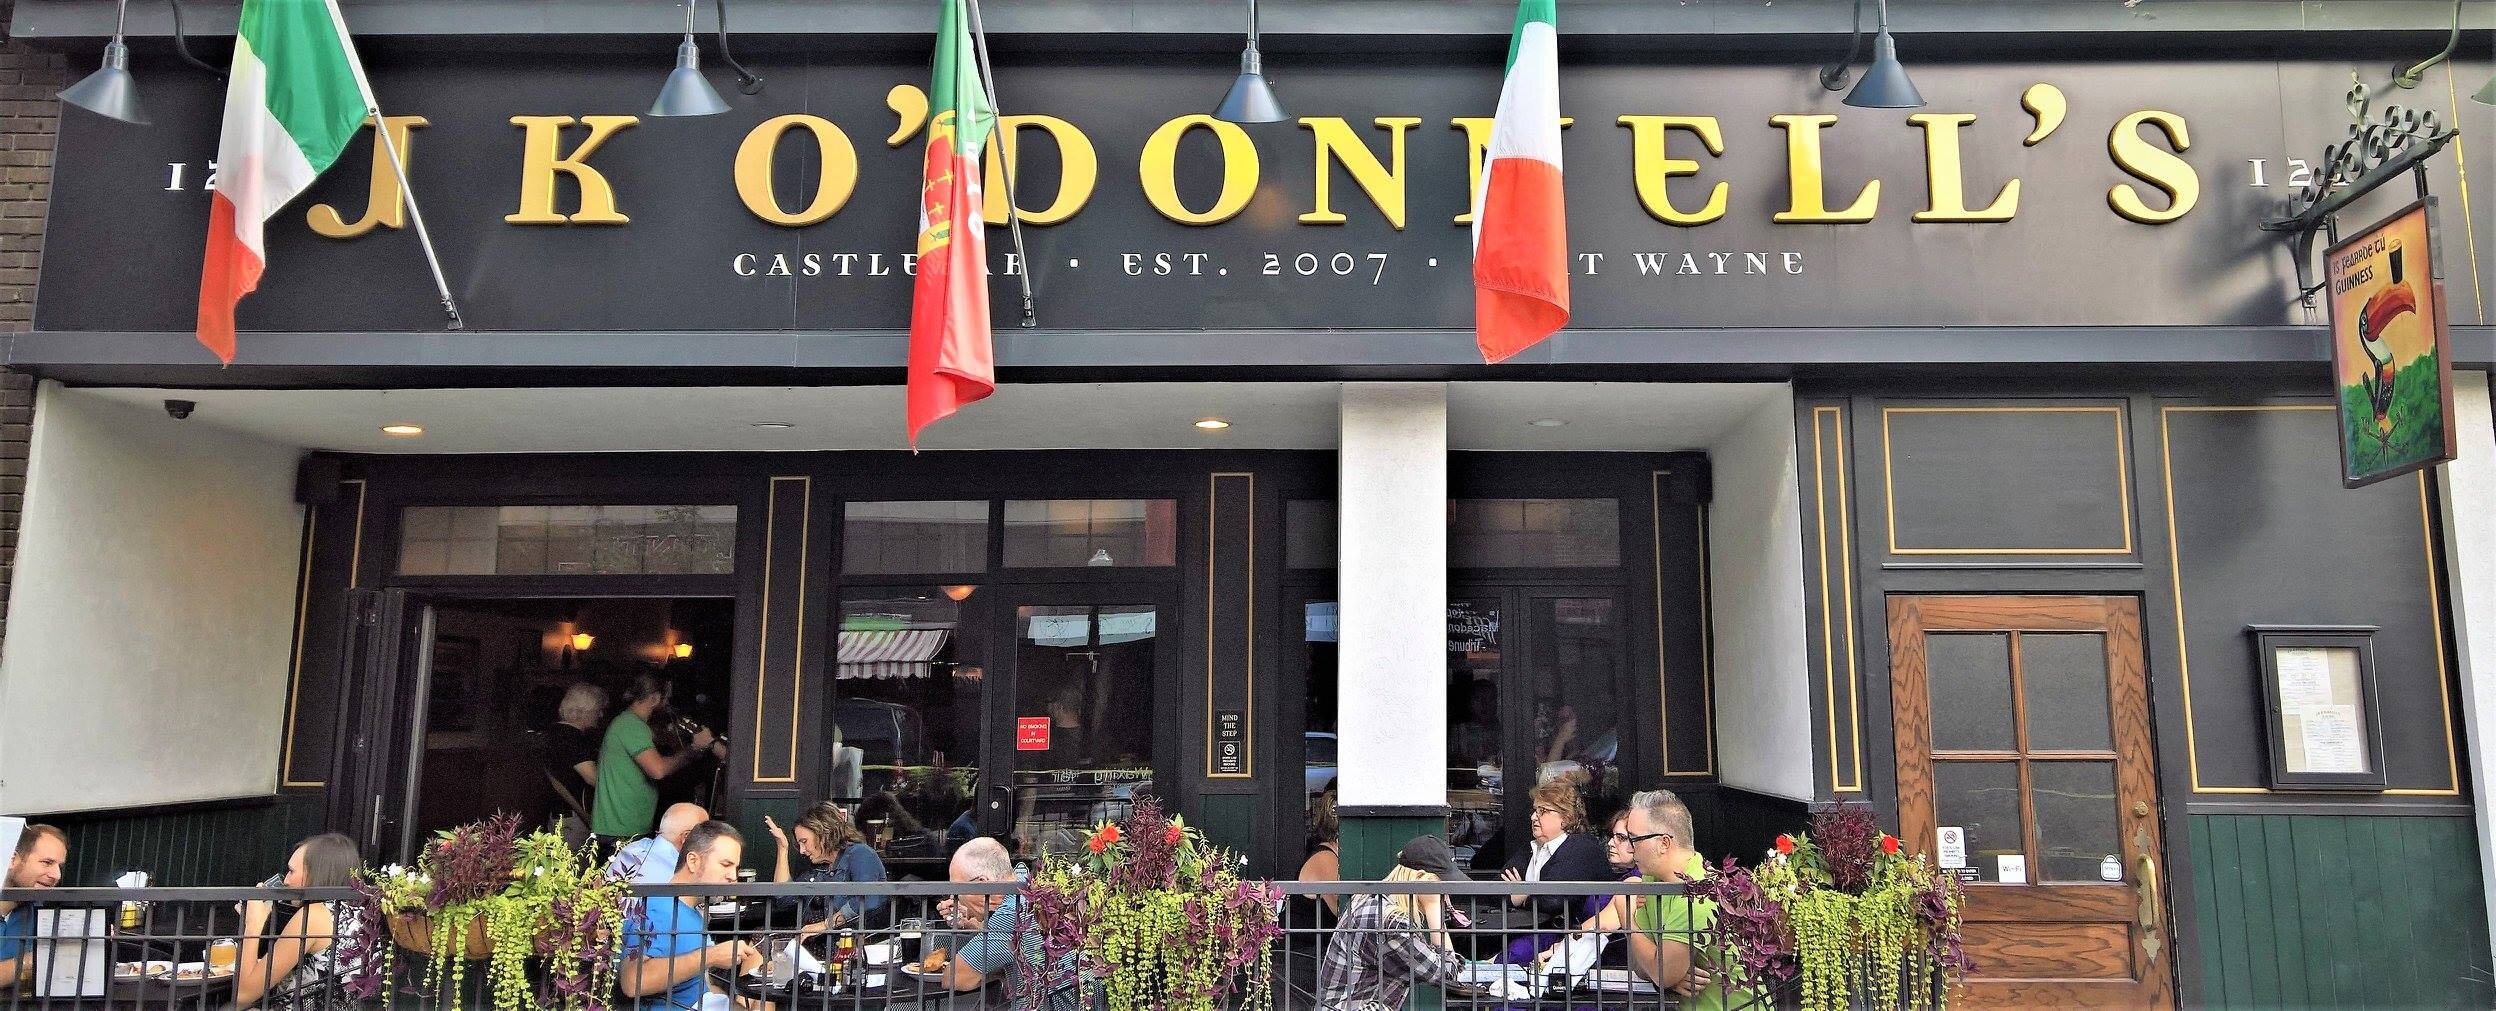 JK O'Donnell's offers outdoor dining.